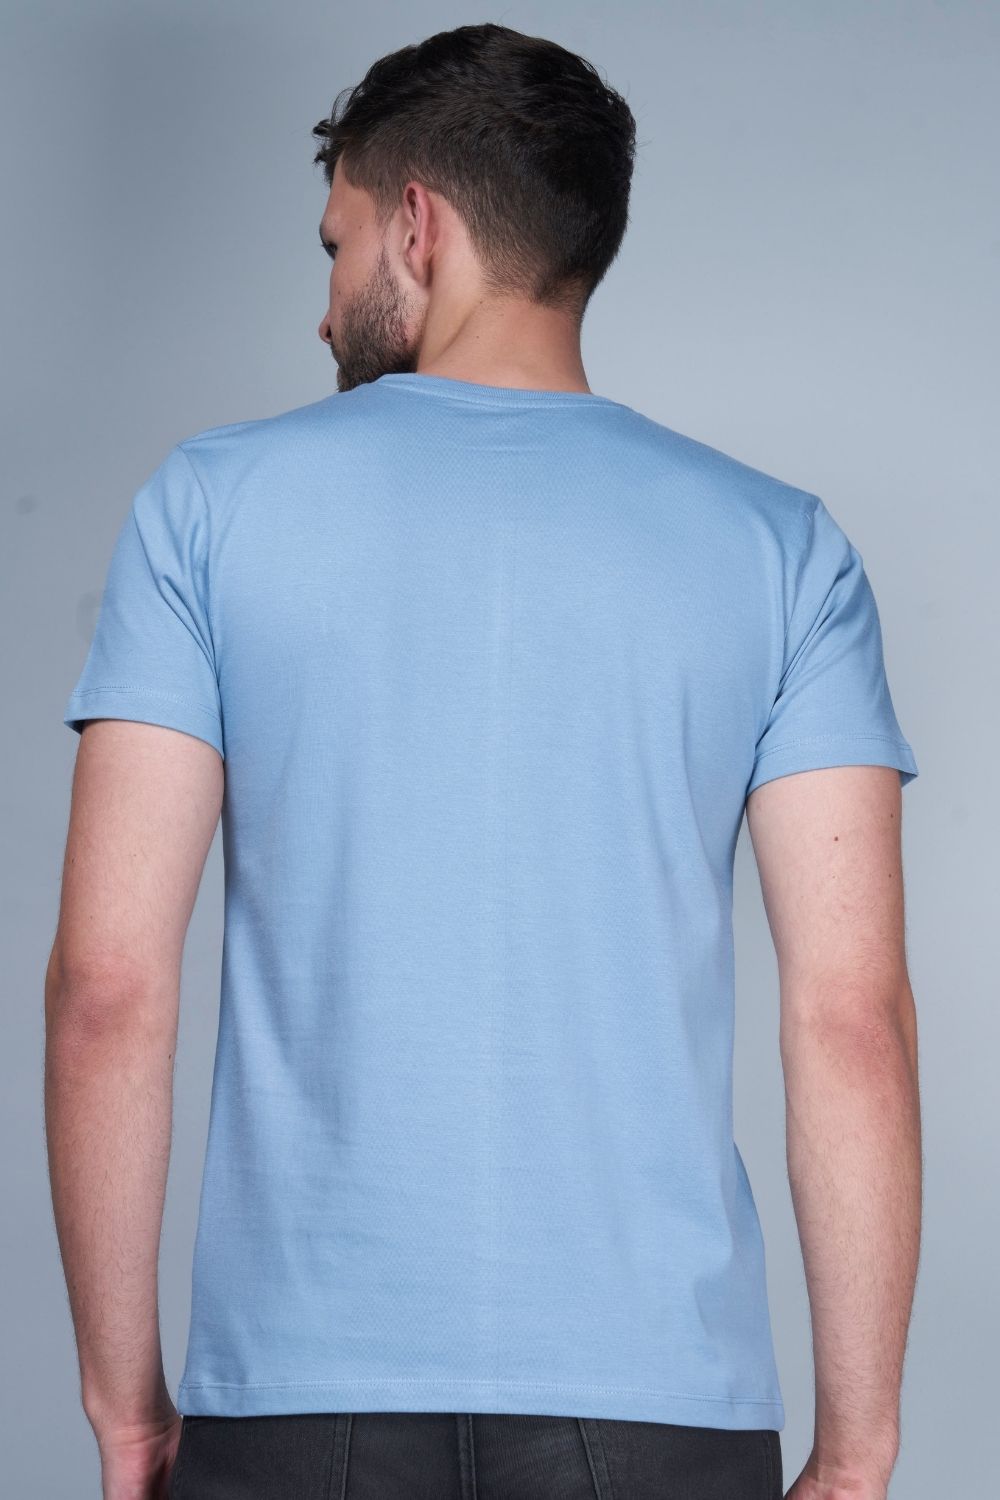 Sky Blue colored, Solid T shirt for men, with half sleeves and round neck, back view.